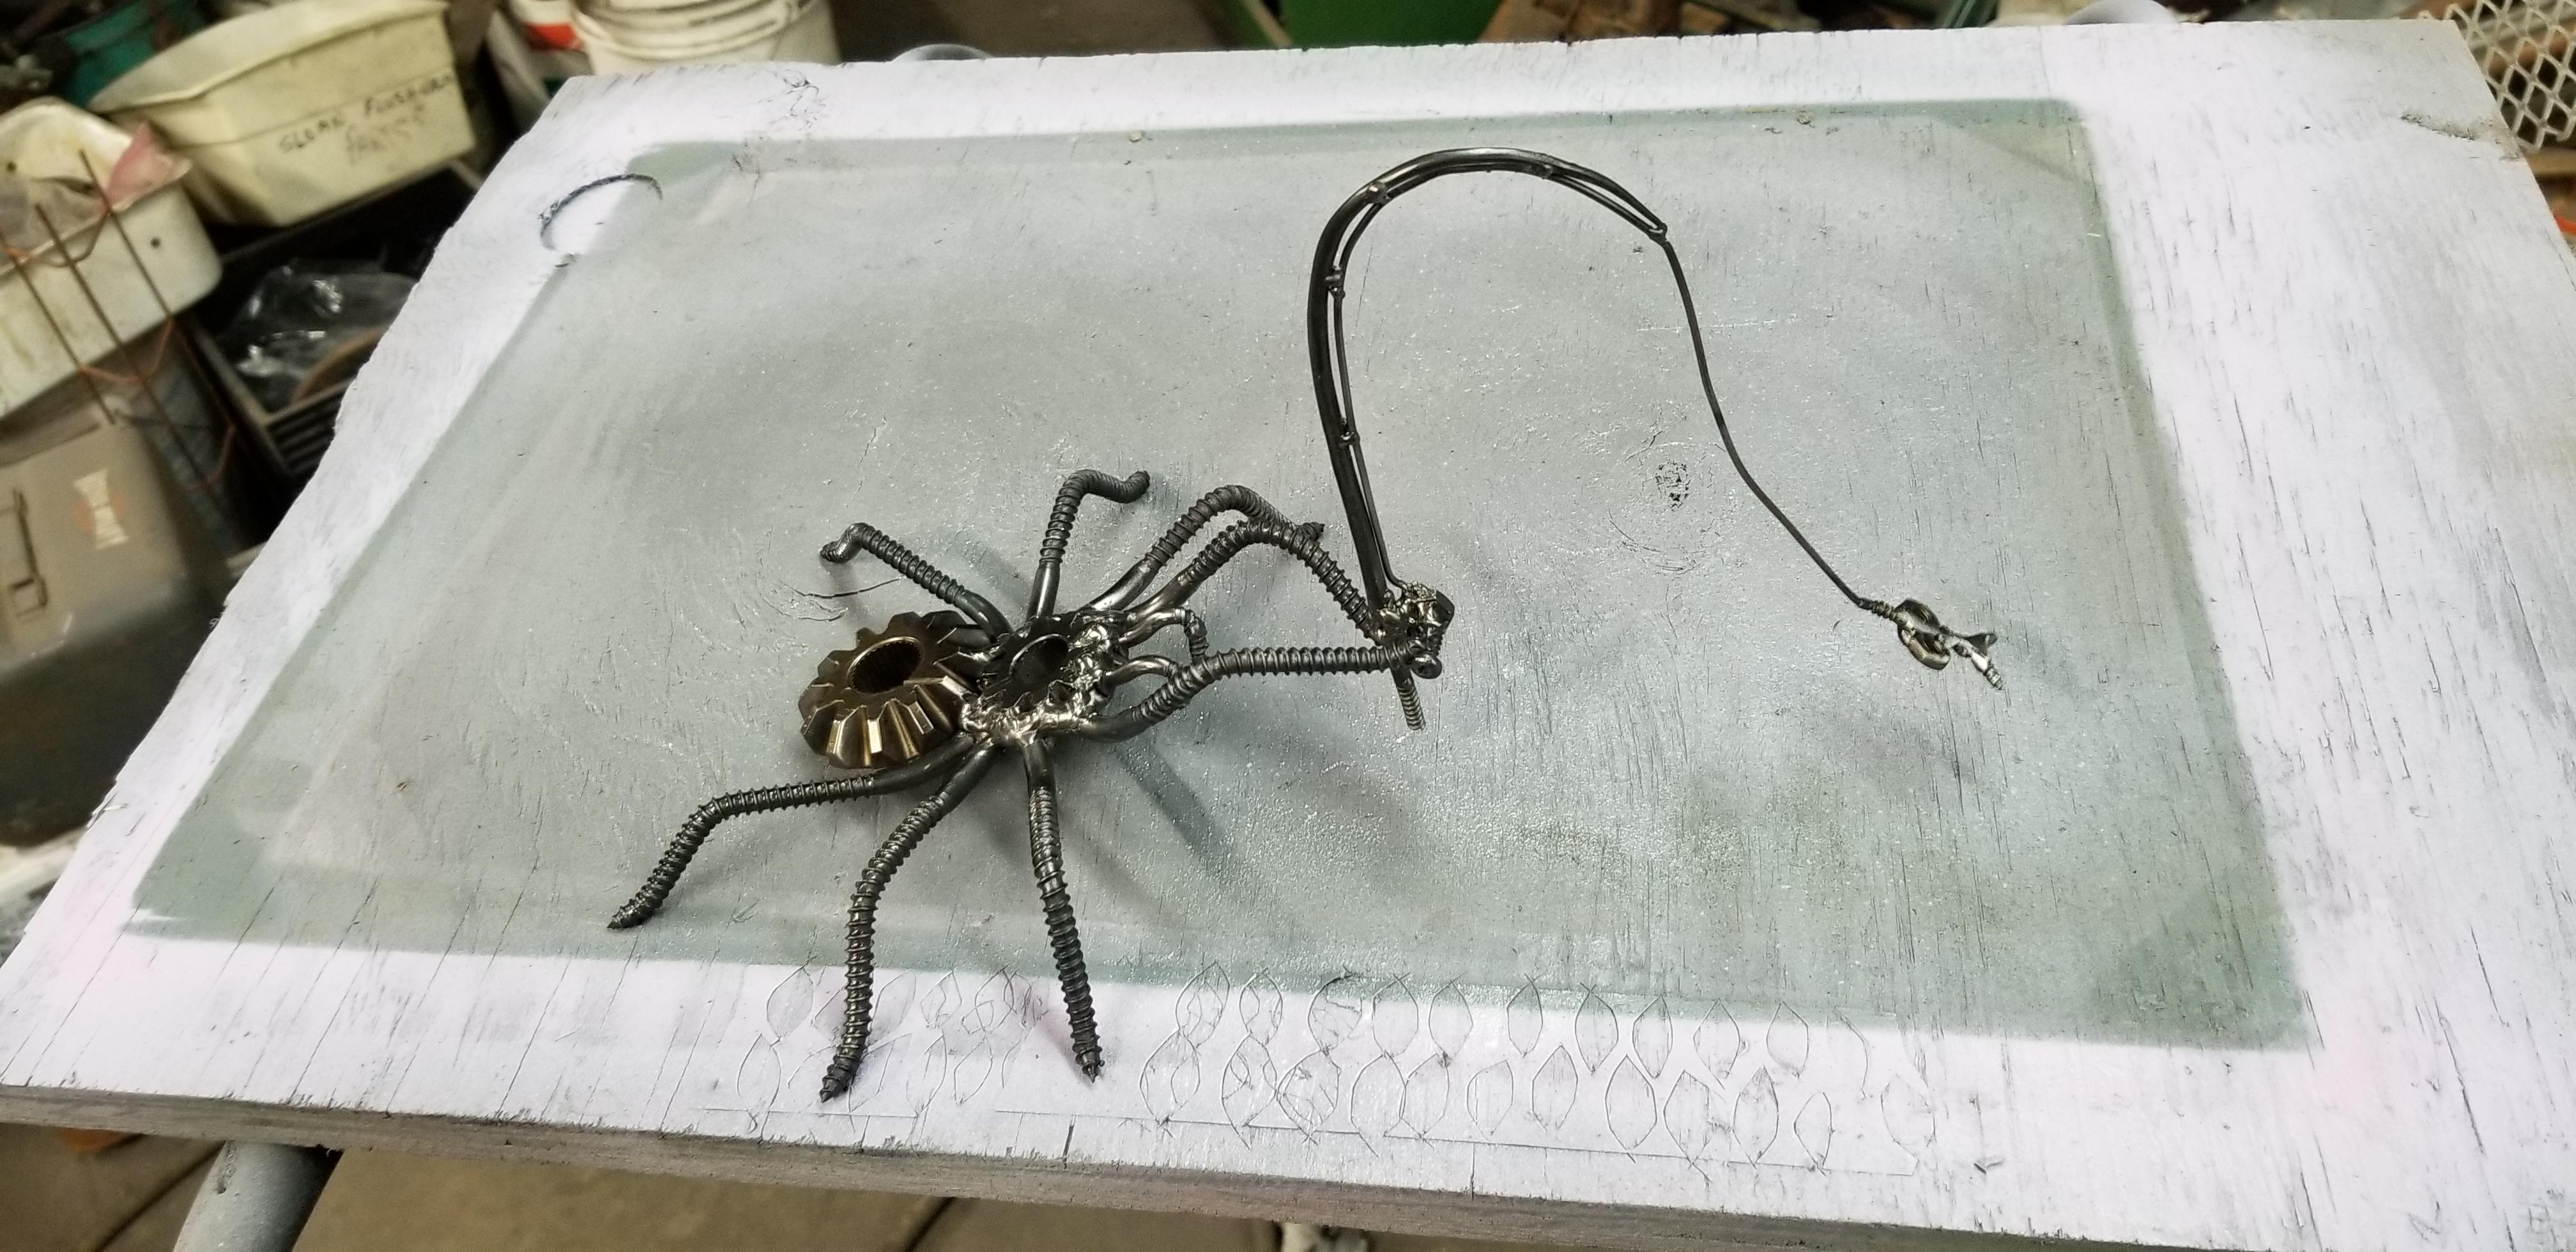 Fishing Spider - Metal Sculpture & Carvings - I Forge Iron